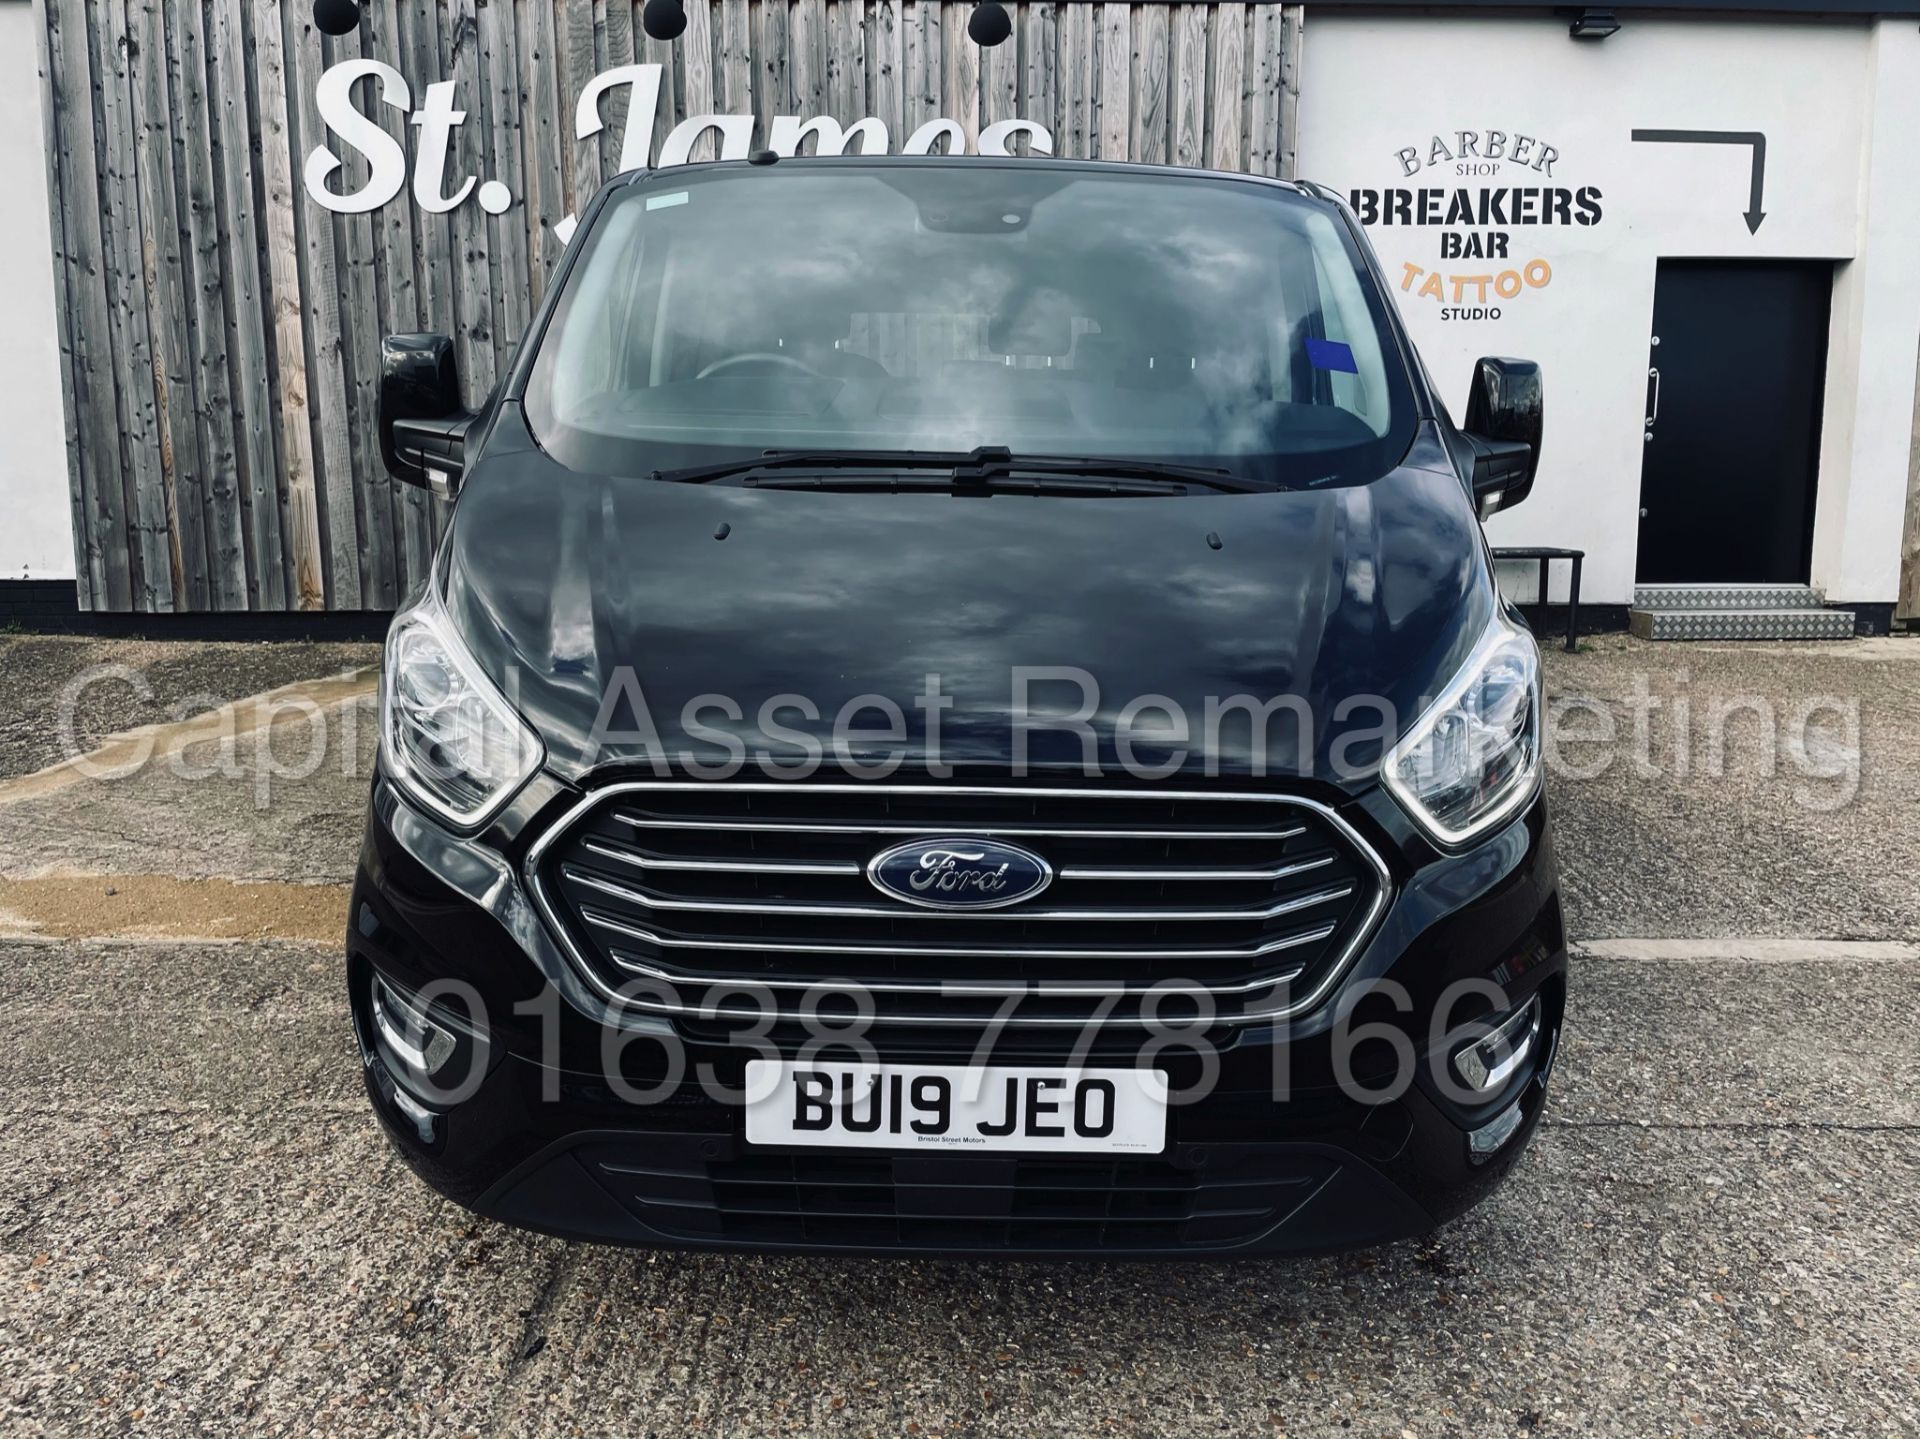 (On Sale) FORD TRANSIT CUSTOM TOURNEO *9 SEATER MPV / BUS* (2019) '2.0 TDCI - 130 BHP' (1 OWNER) - Image 13 of 46